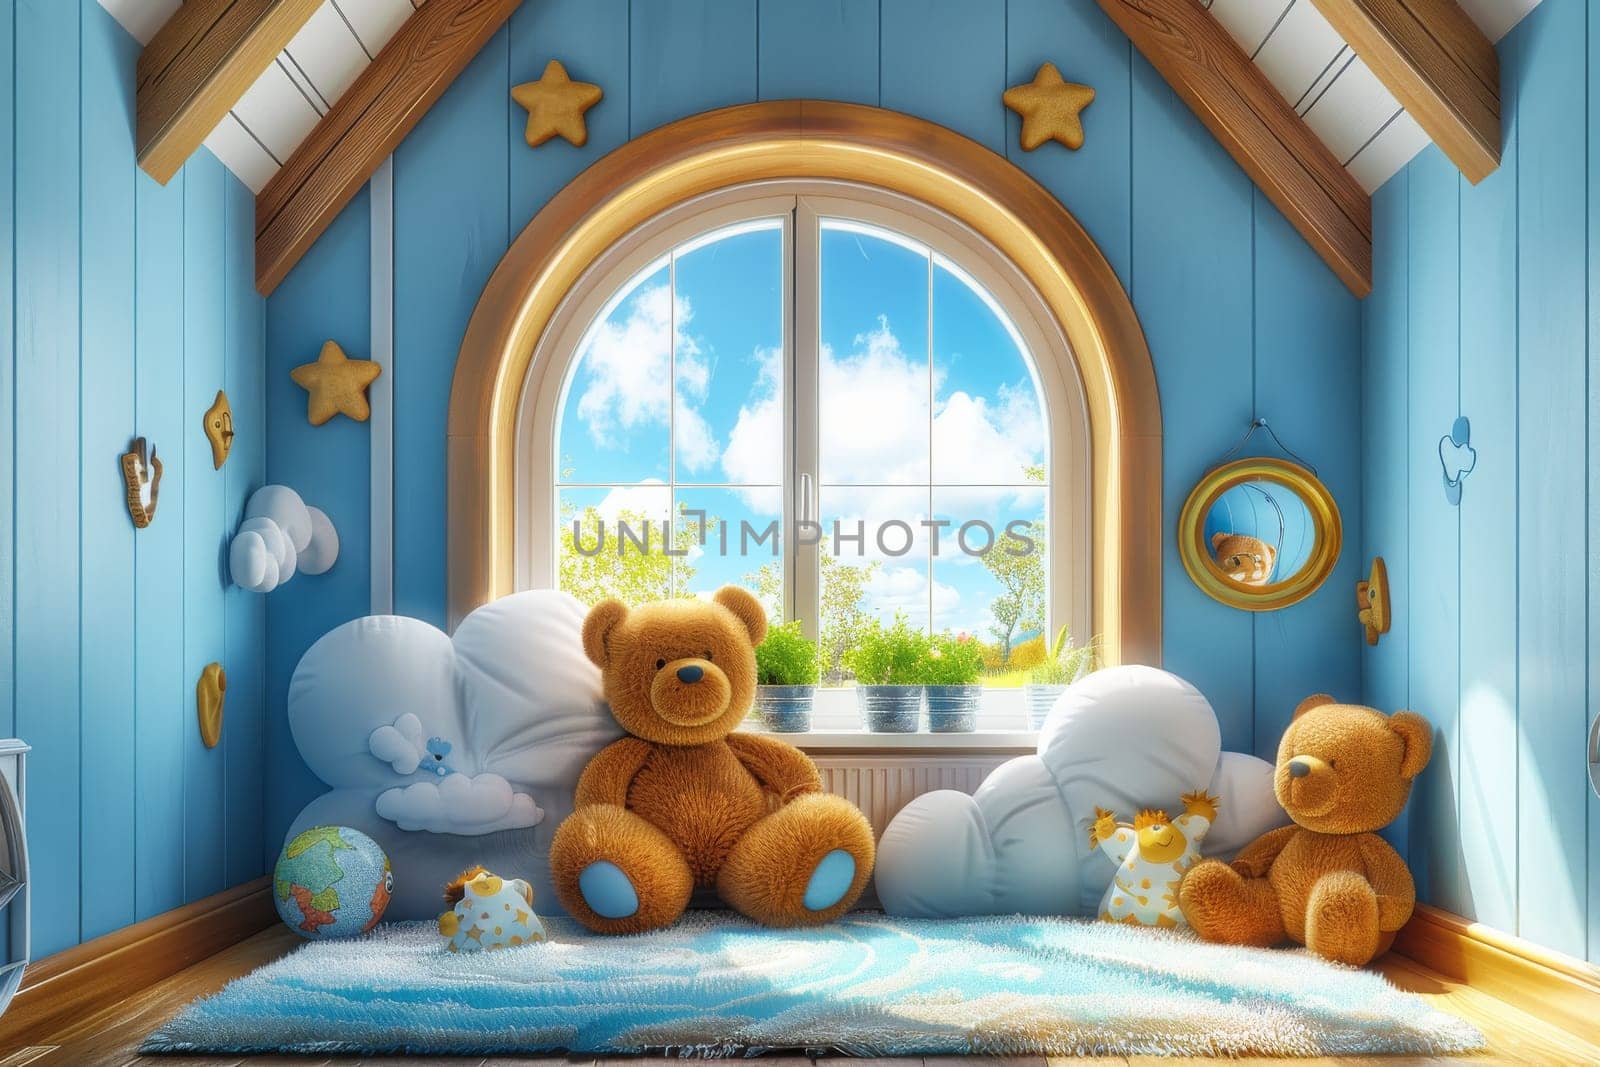 A room with a blue ceiling and a window. Three teddy bears are sitting on the floor in front of the window